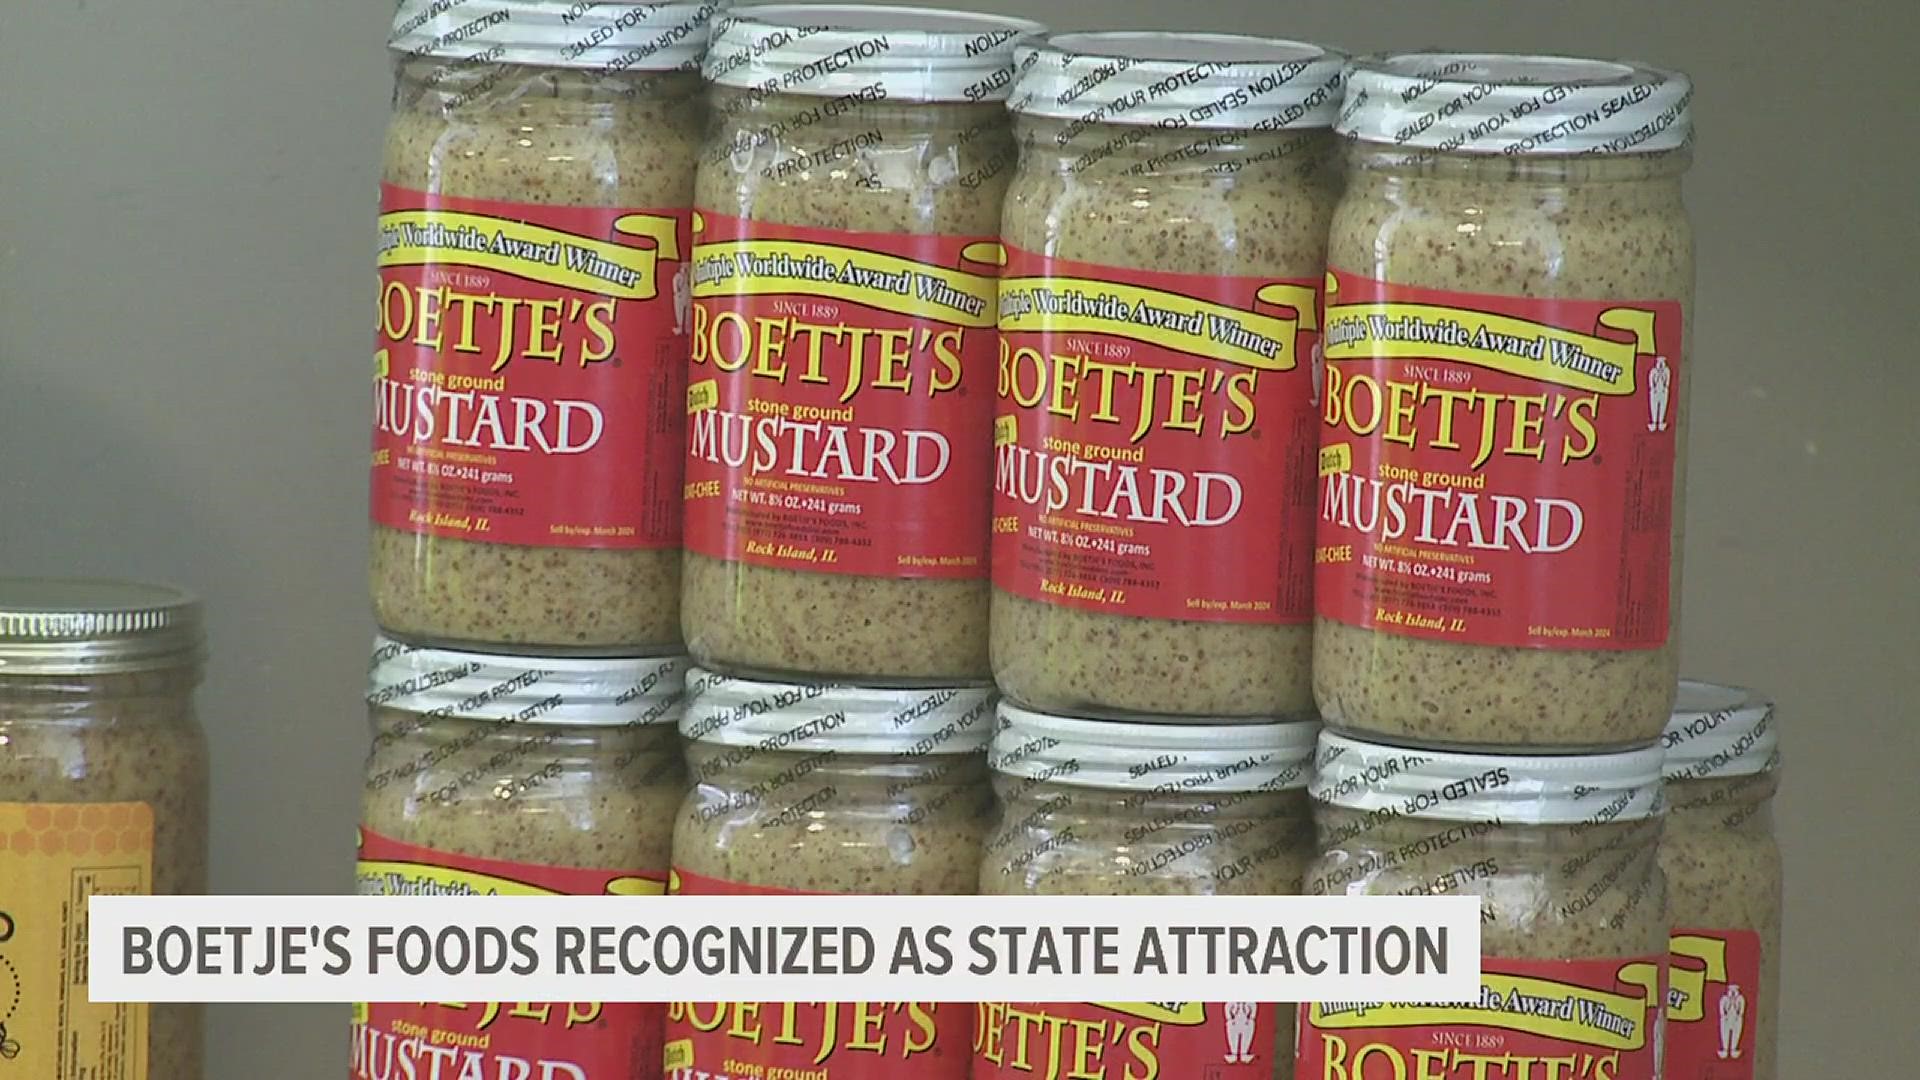 Boetje's and its famous mustard were inducted into the Illinois-Made program, which highlights small businesses as visitor attractions.